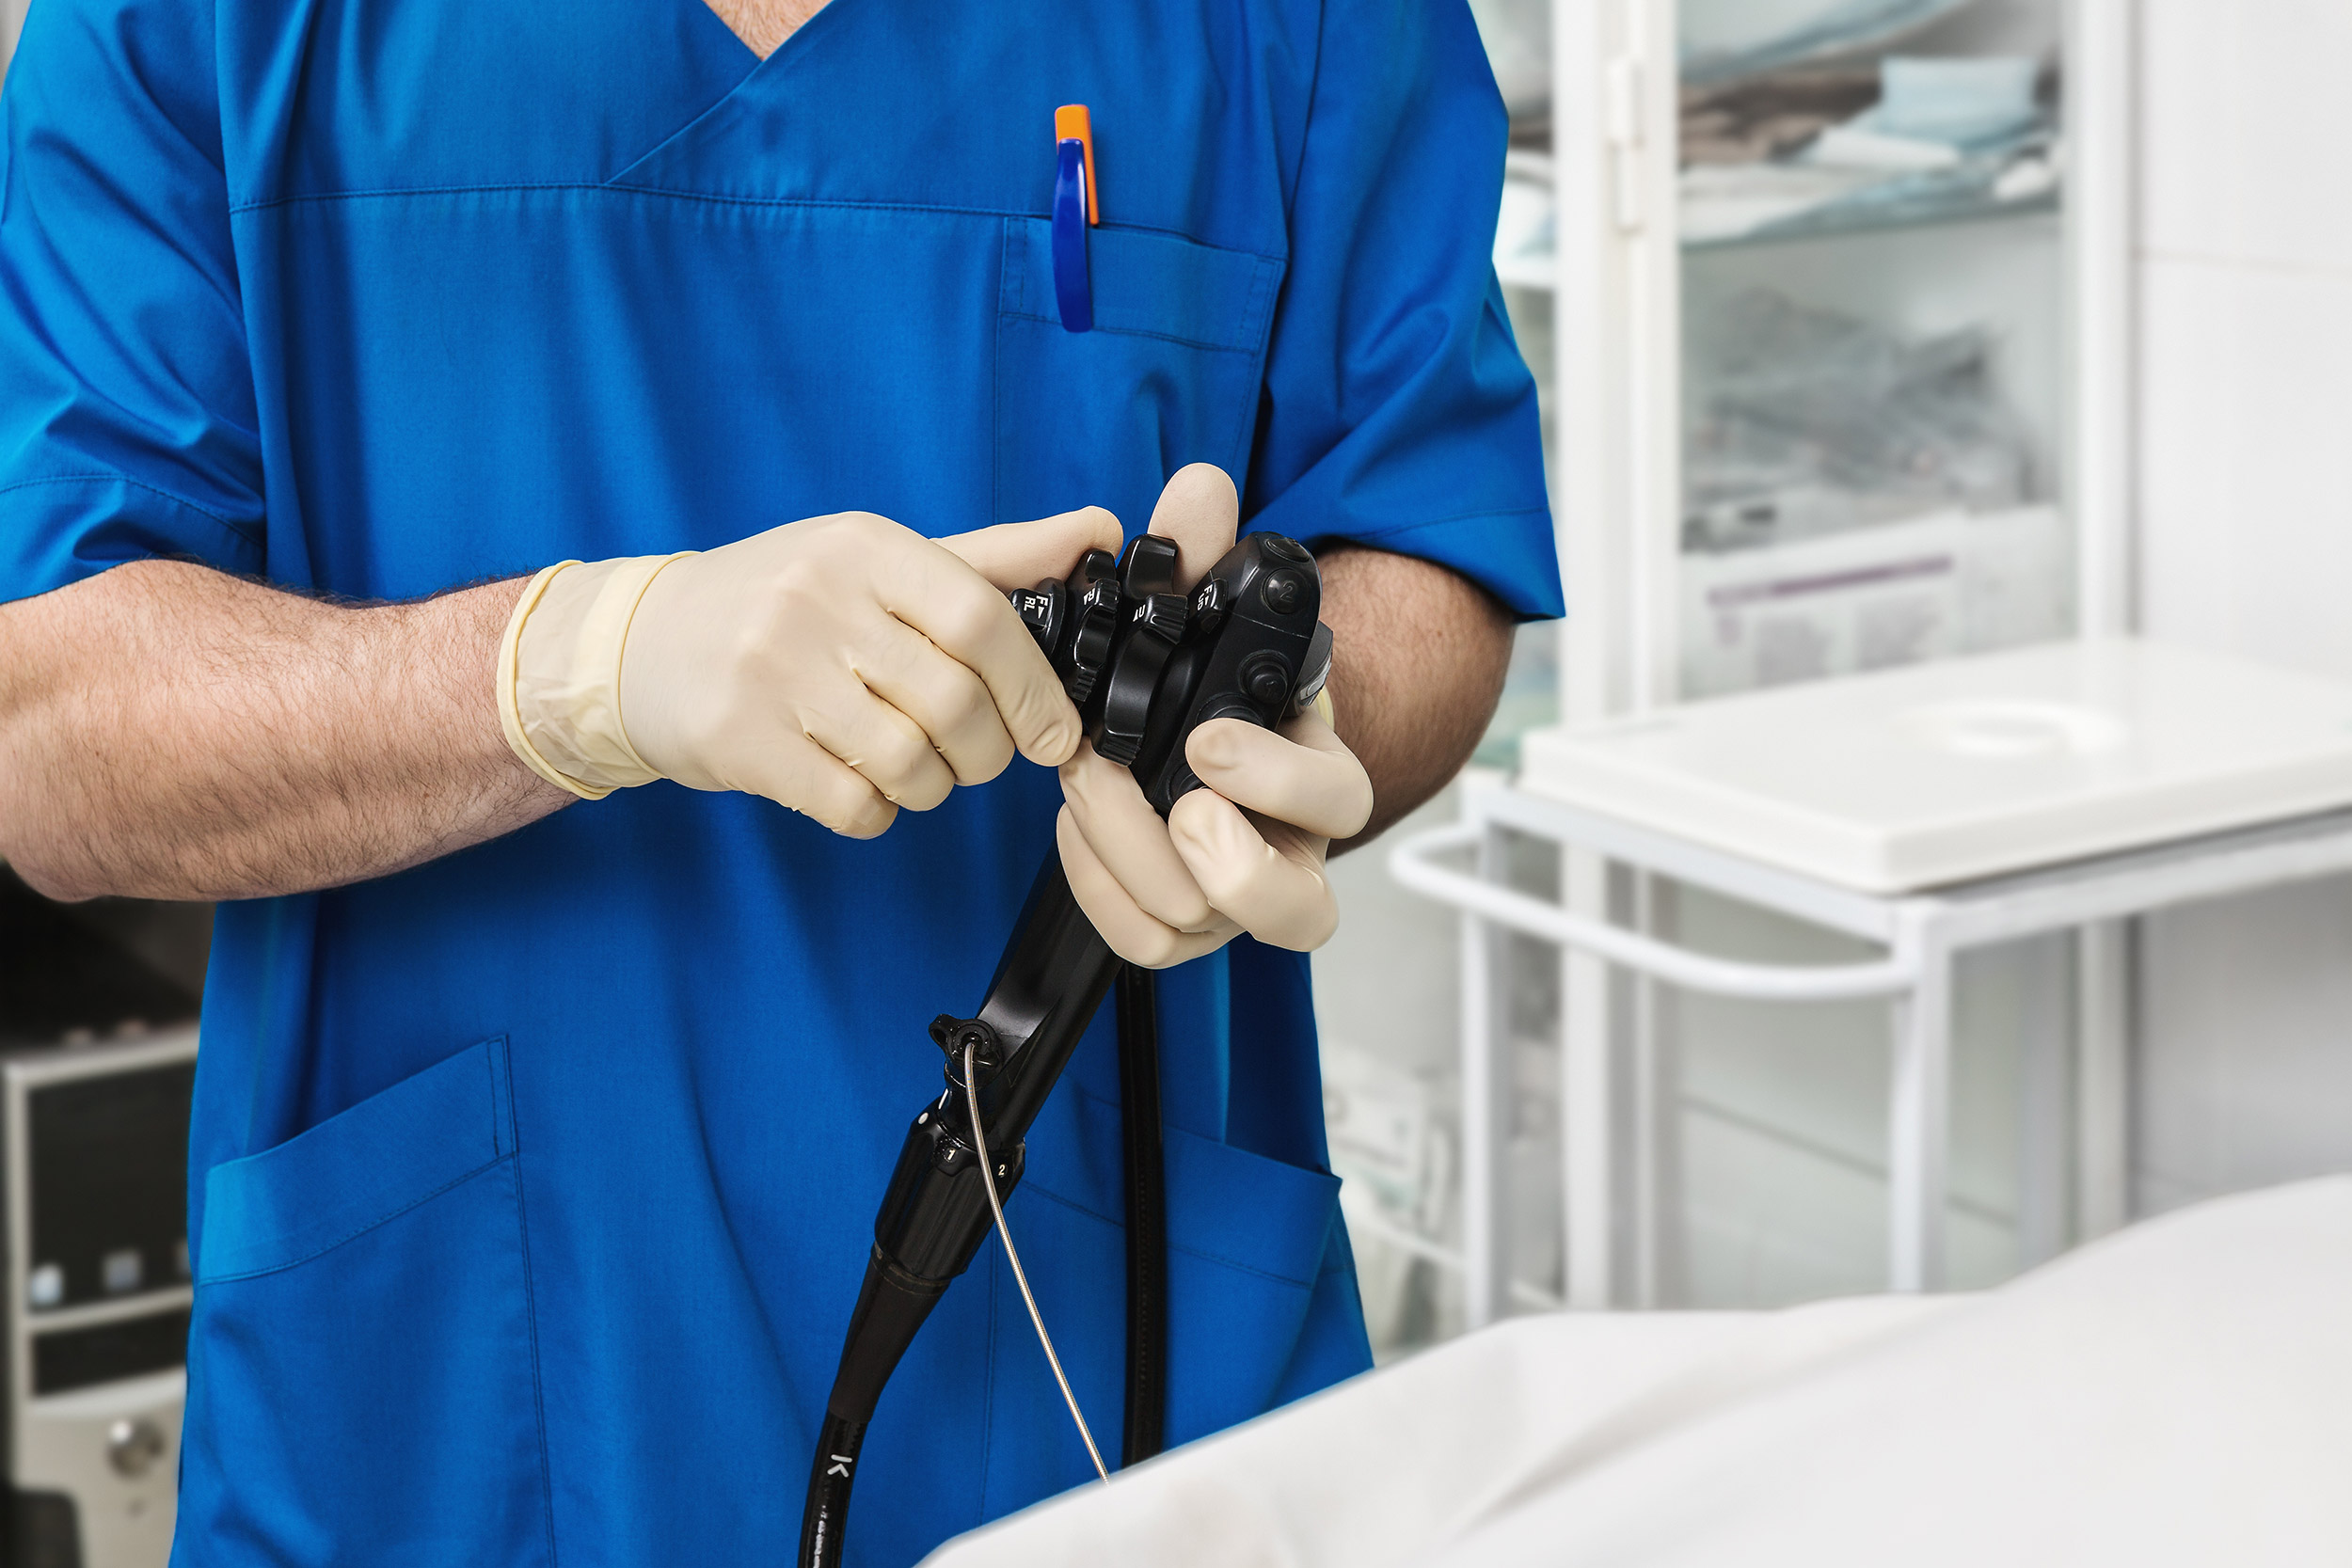 GI endoscopes are difficult to clean and disinfect.